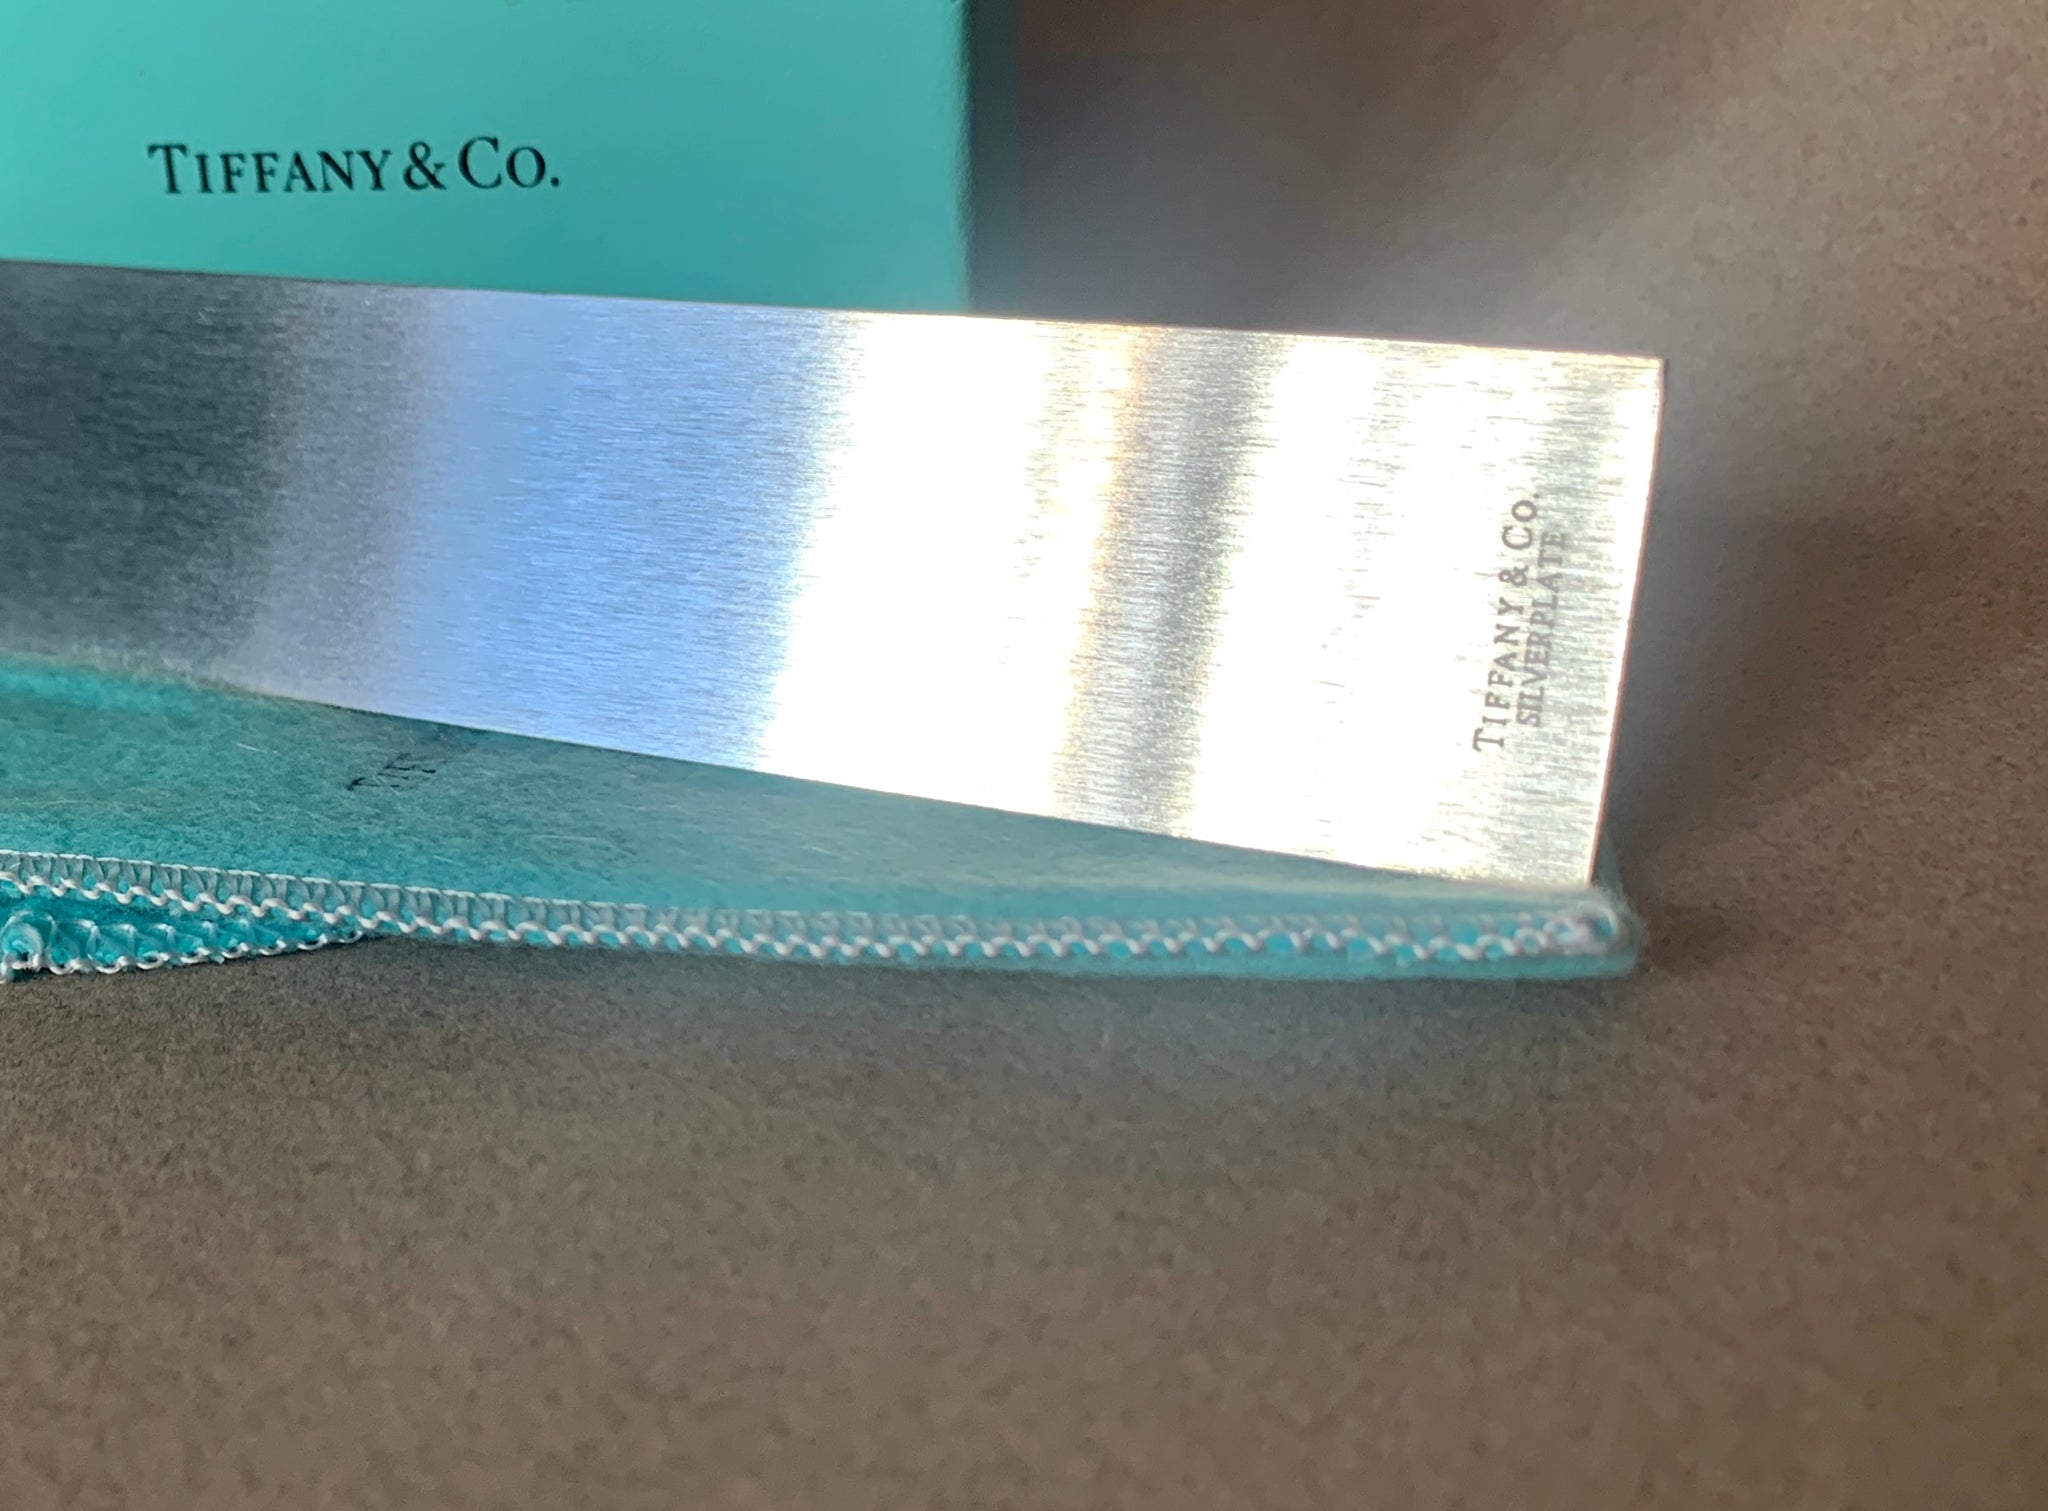 TIFFANY & CO SILVER PLATE MEASURING RULER